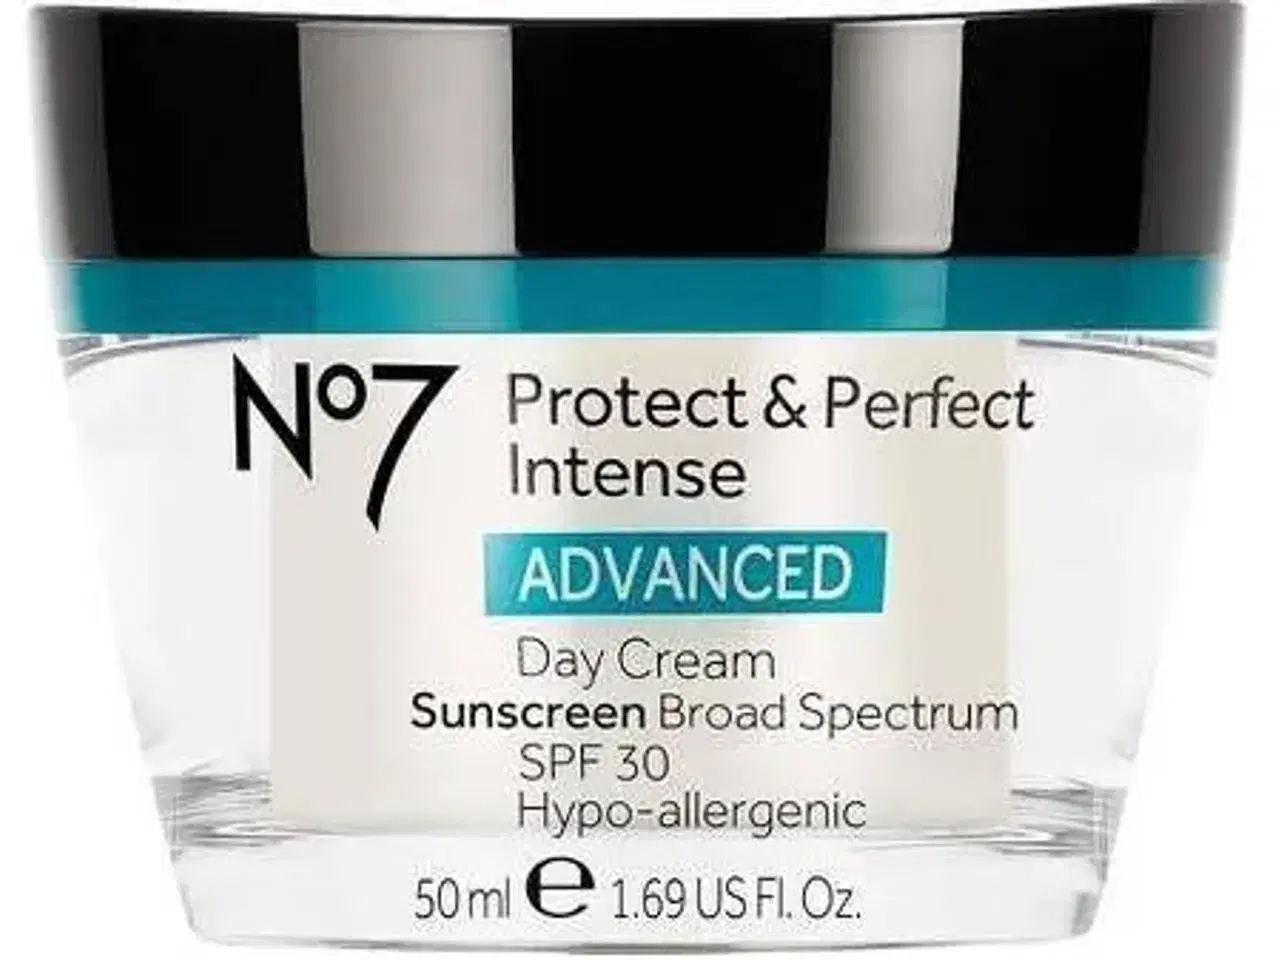 Billede 1 - No7 Protect And Perfect Intense Advanced